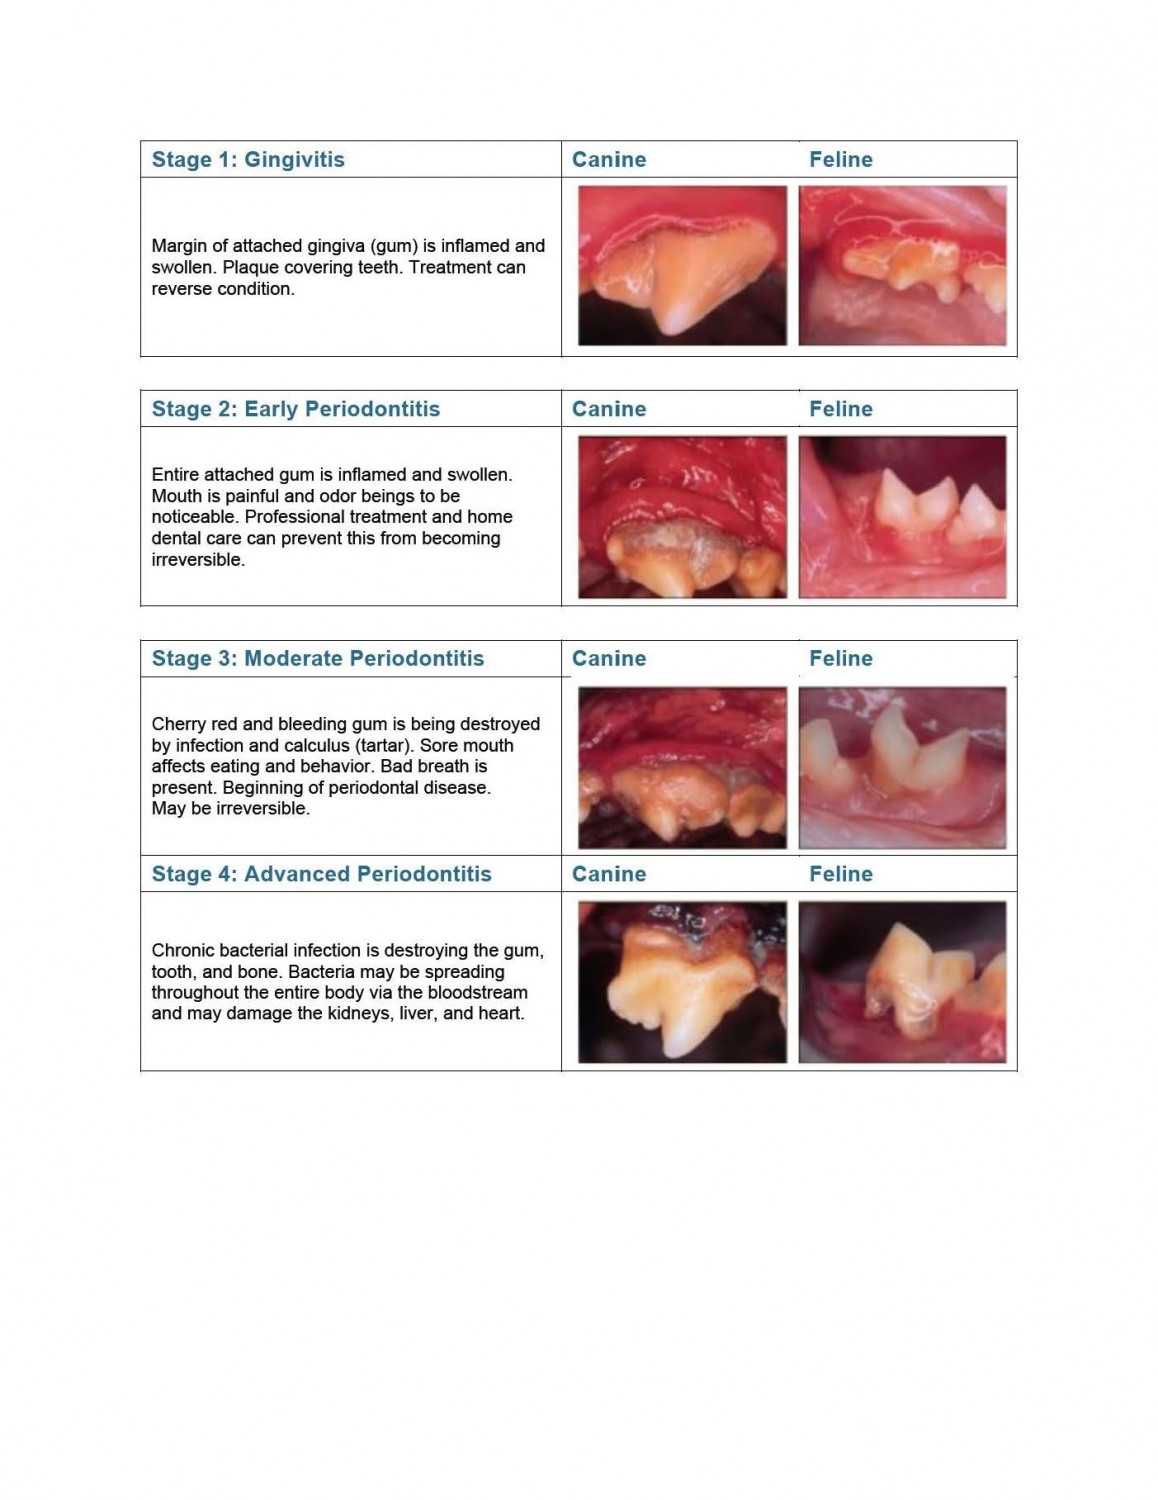 4 Stages of Periodontis